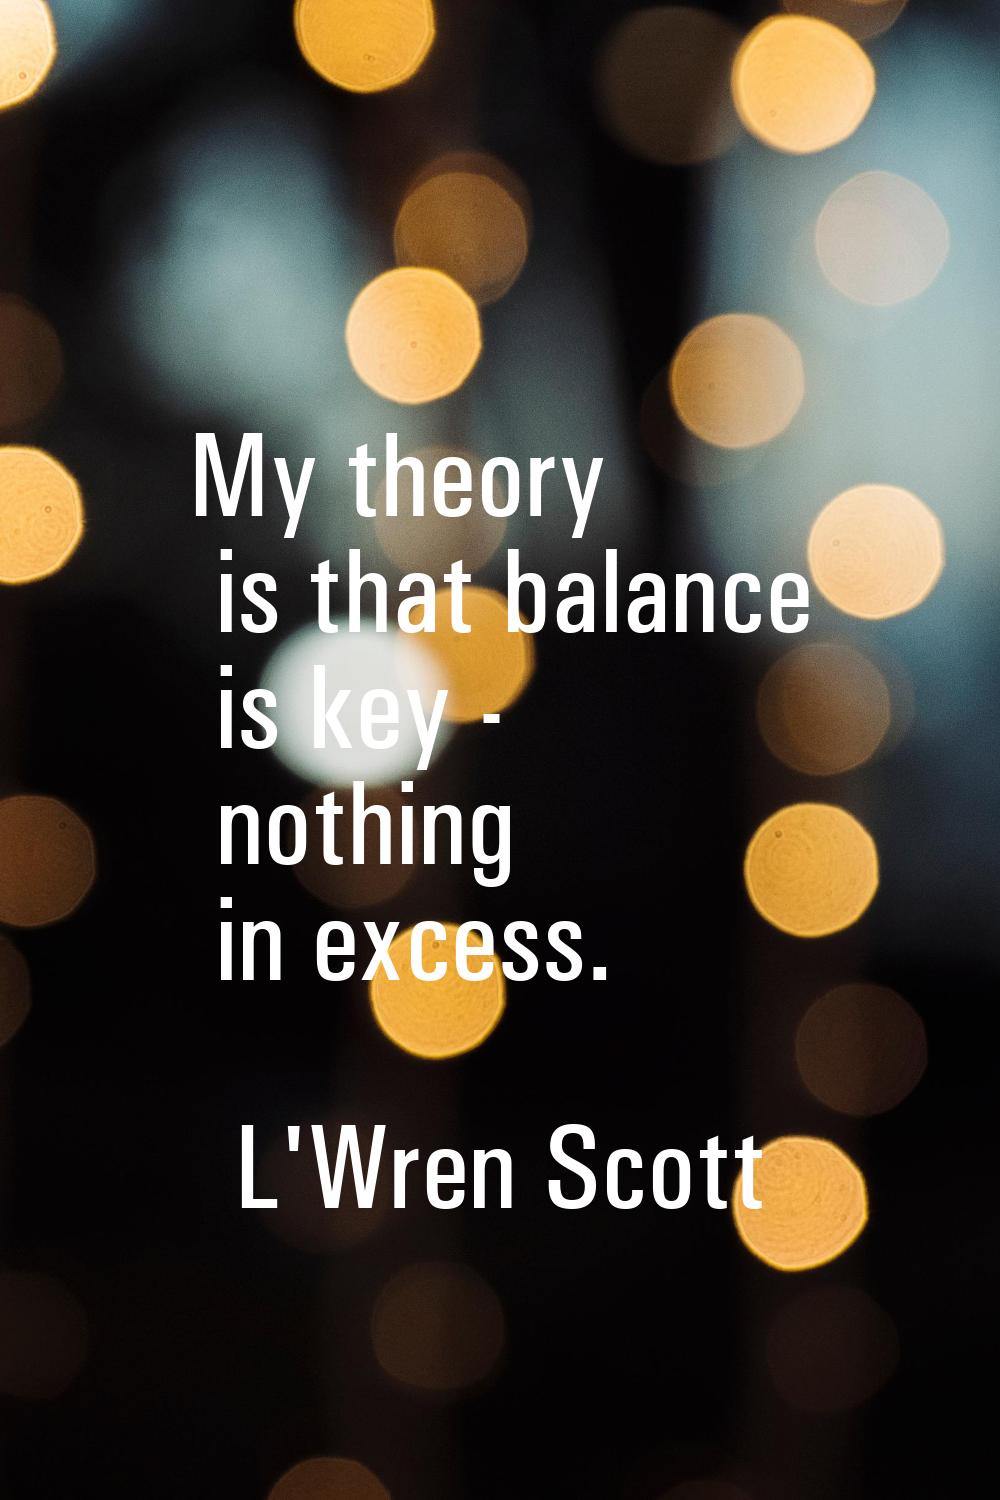 My theory is that balance is key - nothing in excess.